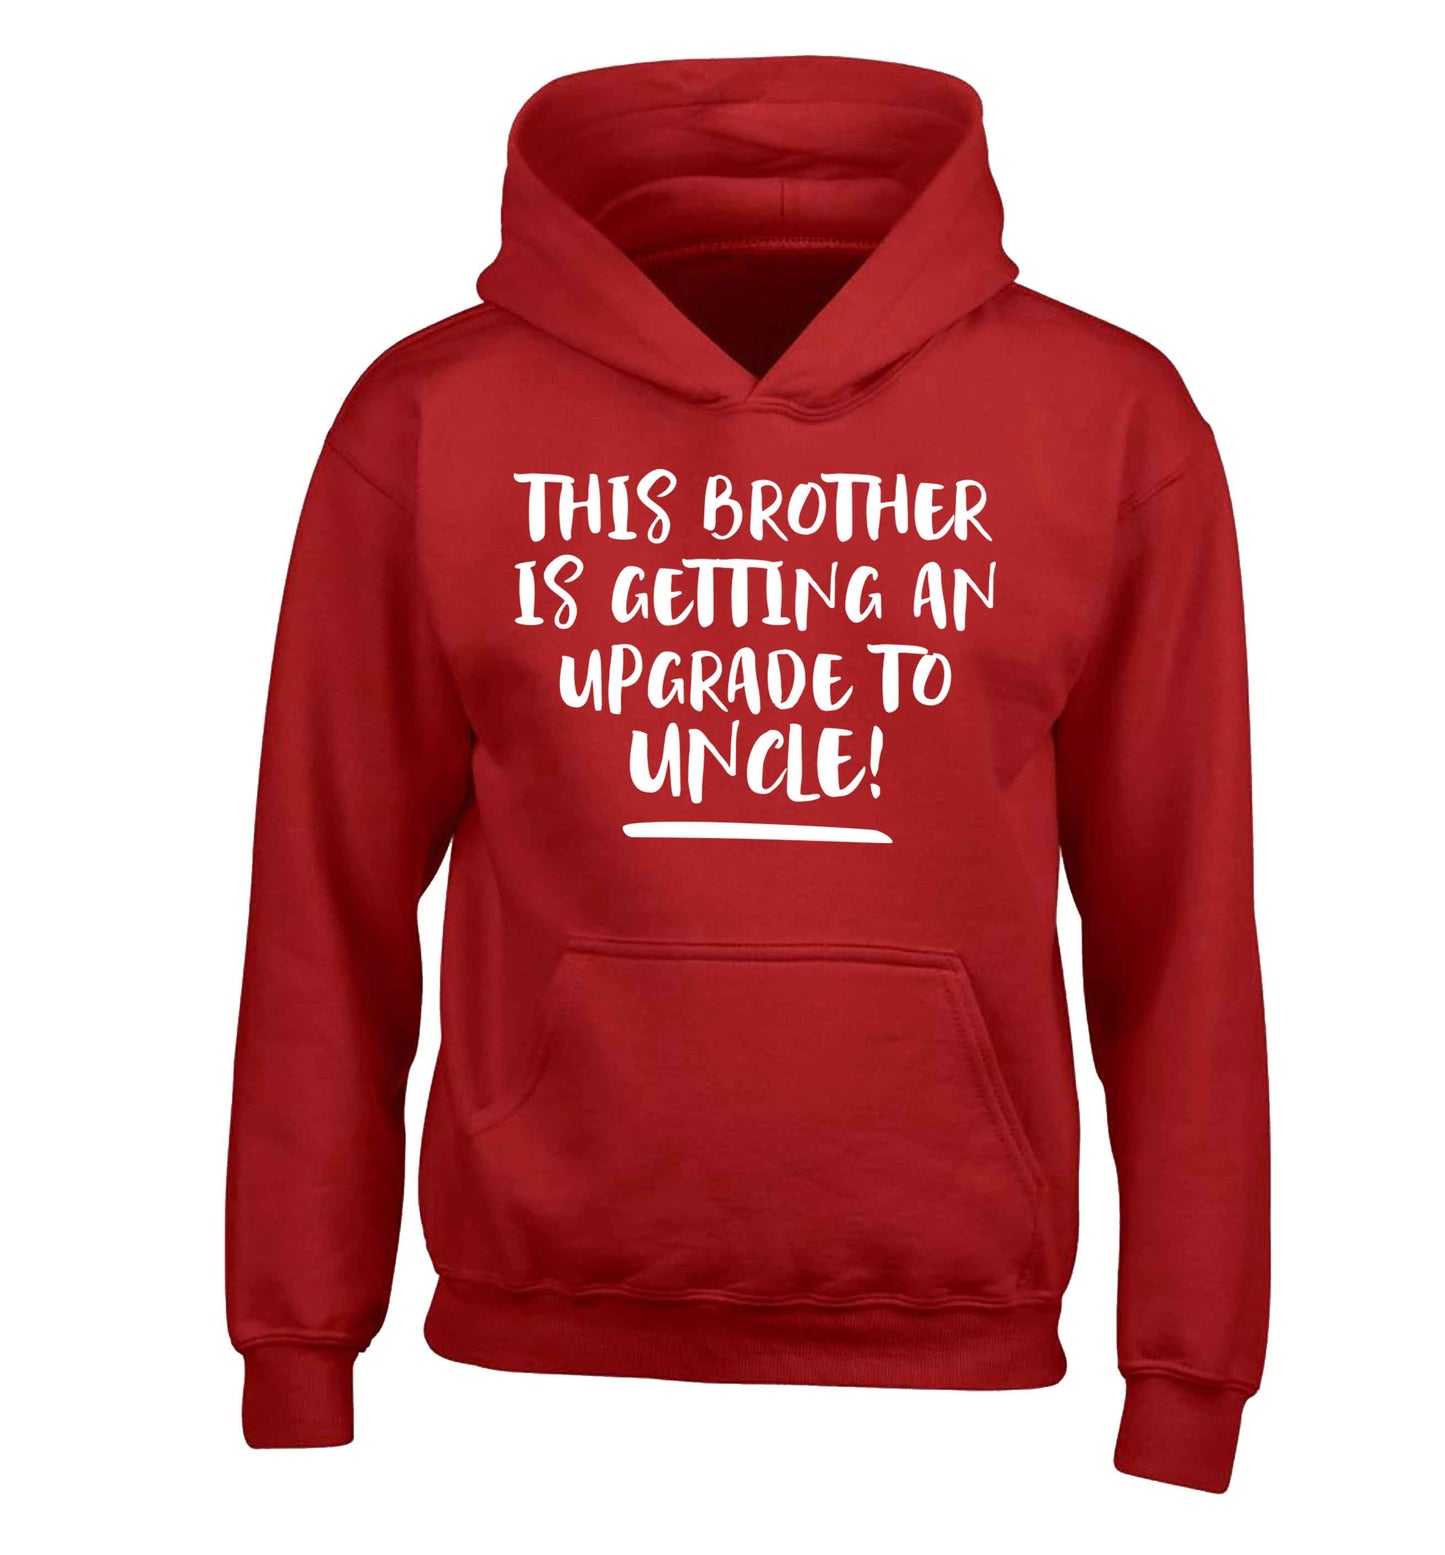 This brother is getting an upgrade to uncle! children's red hoodie 12-13 Years